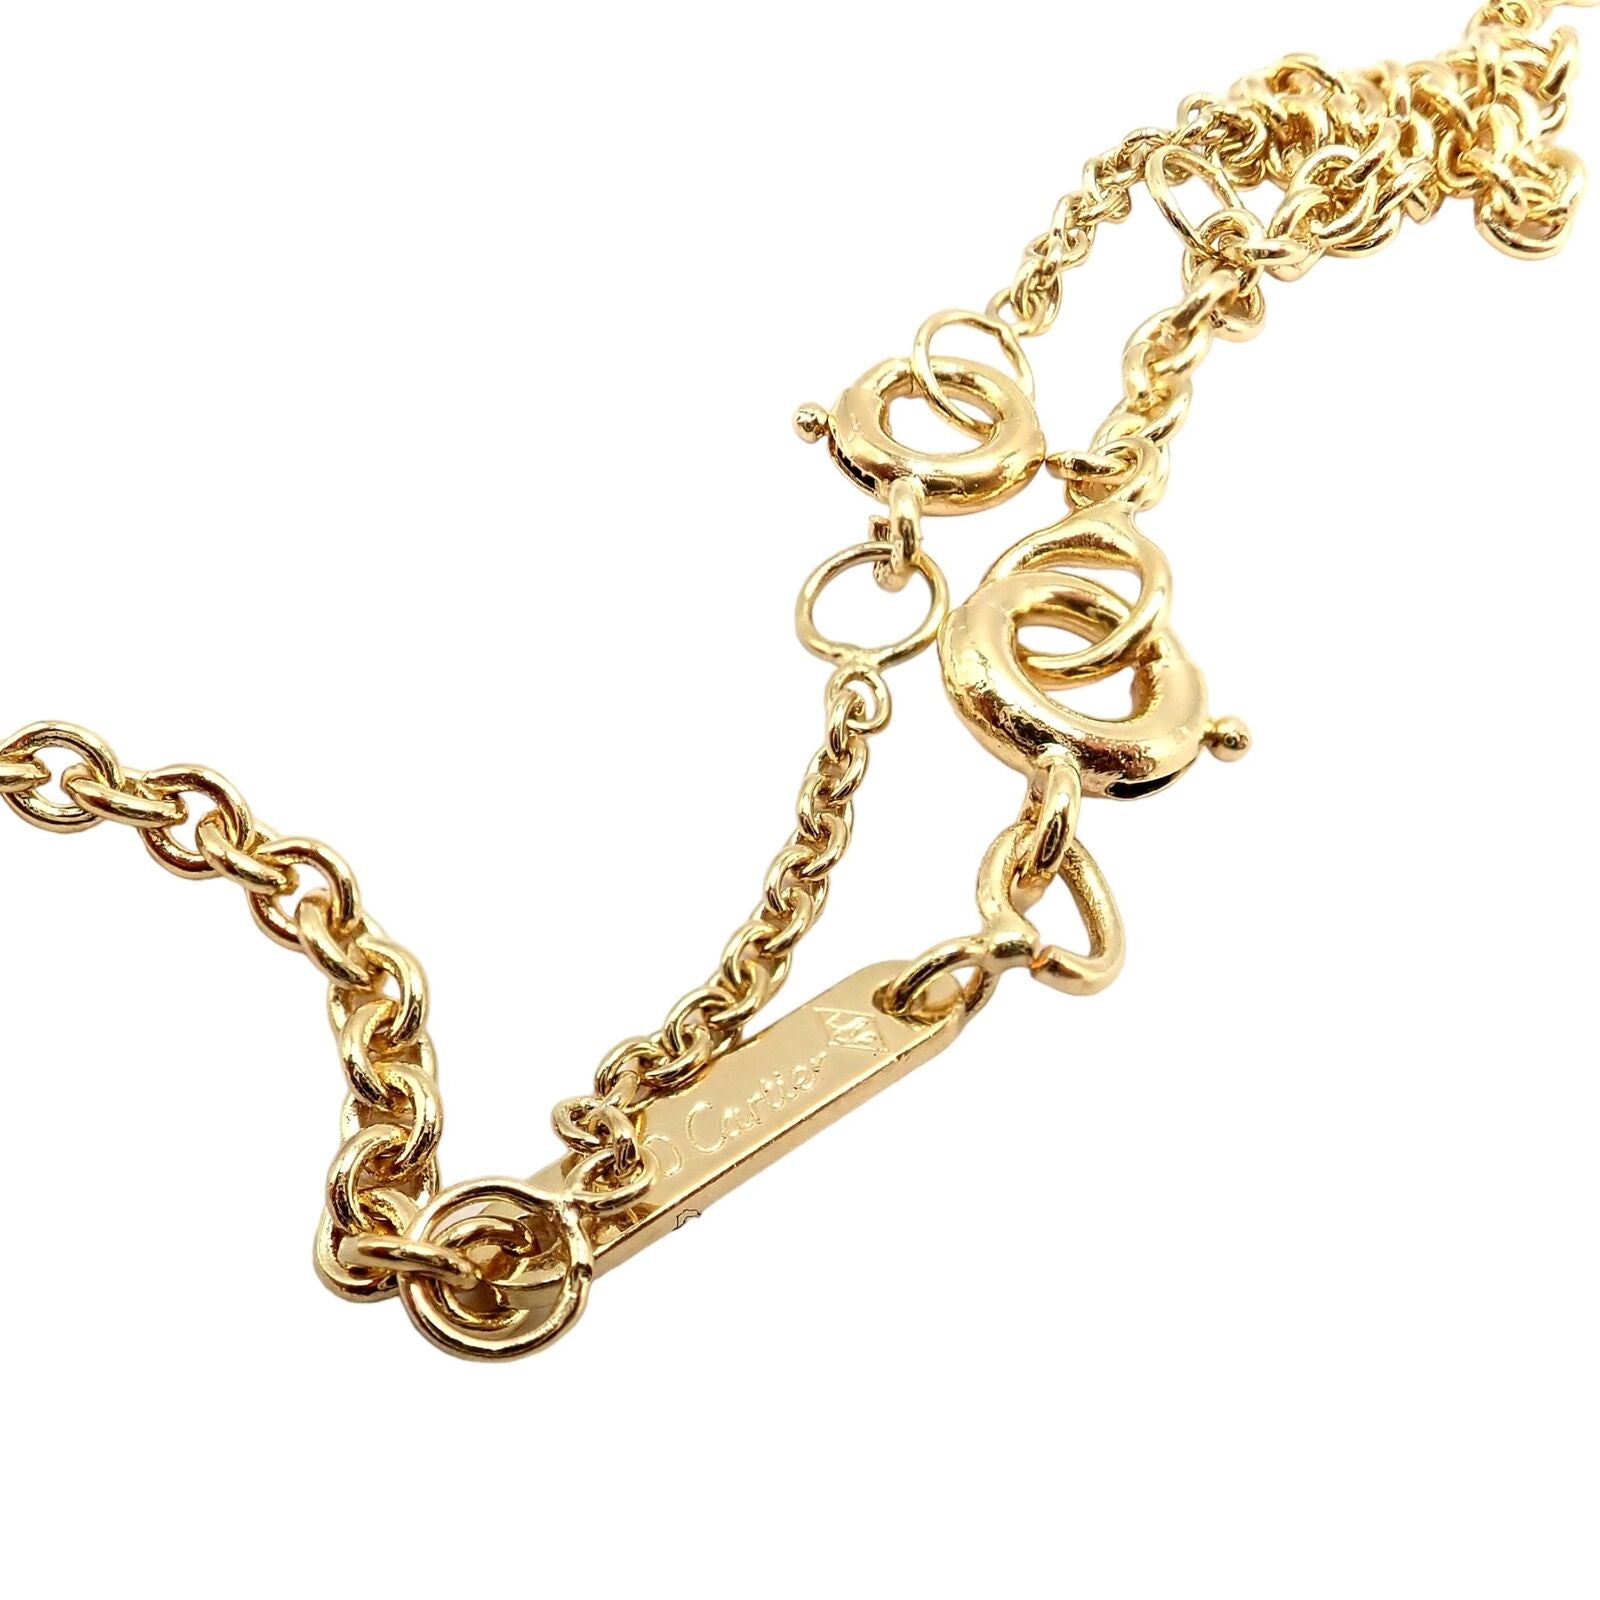 Cartier Jewelry & Watches:Fine Jewelry:Necklaces & Pendants Authentic! Cartier 18k Yellow Gold Baby Carriage Stroller Charm Pendant Necklace